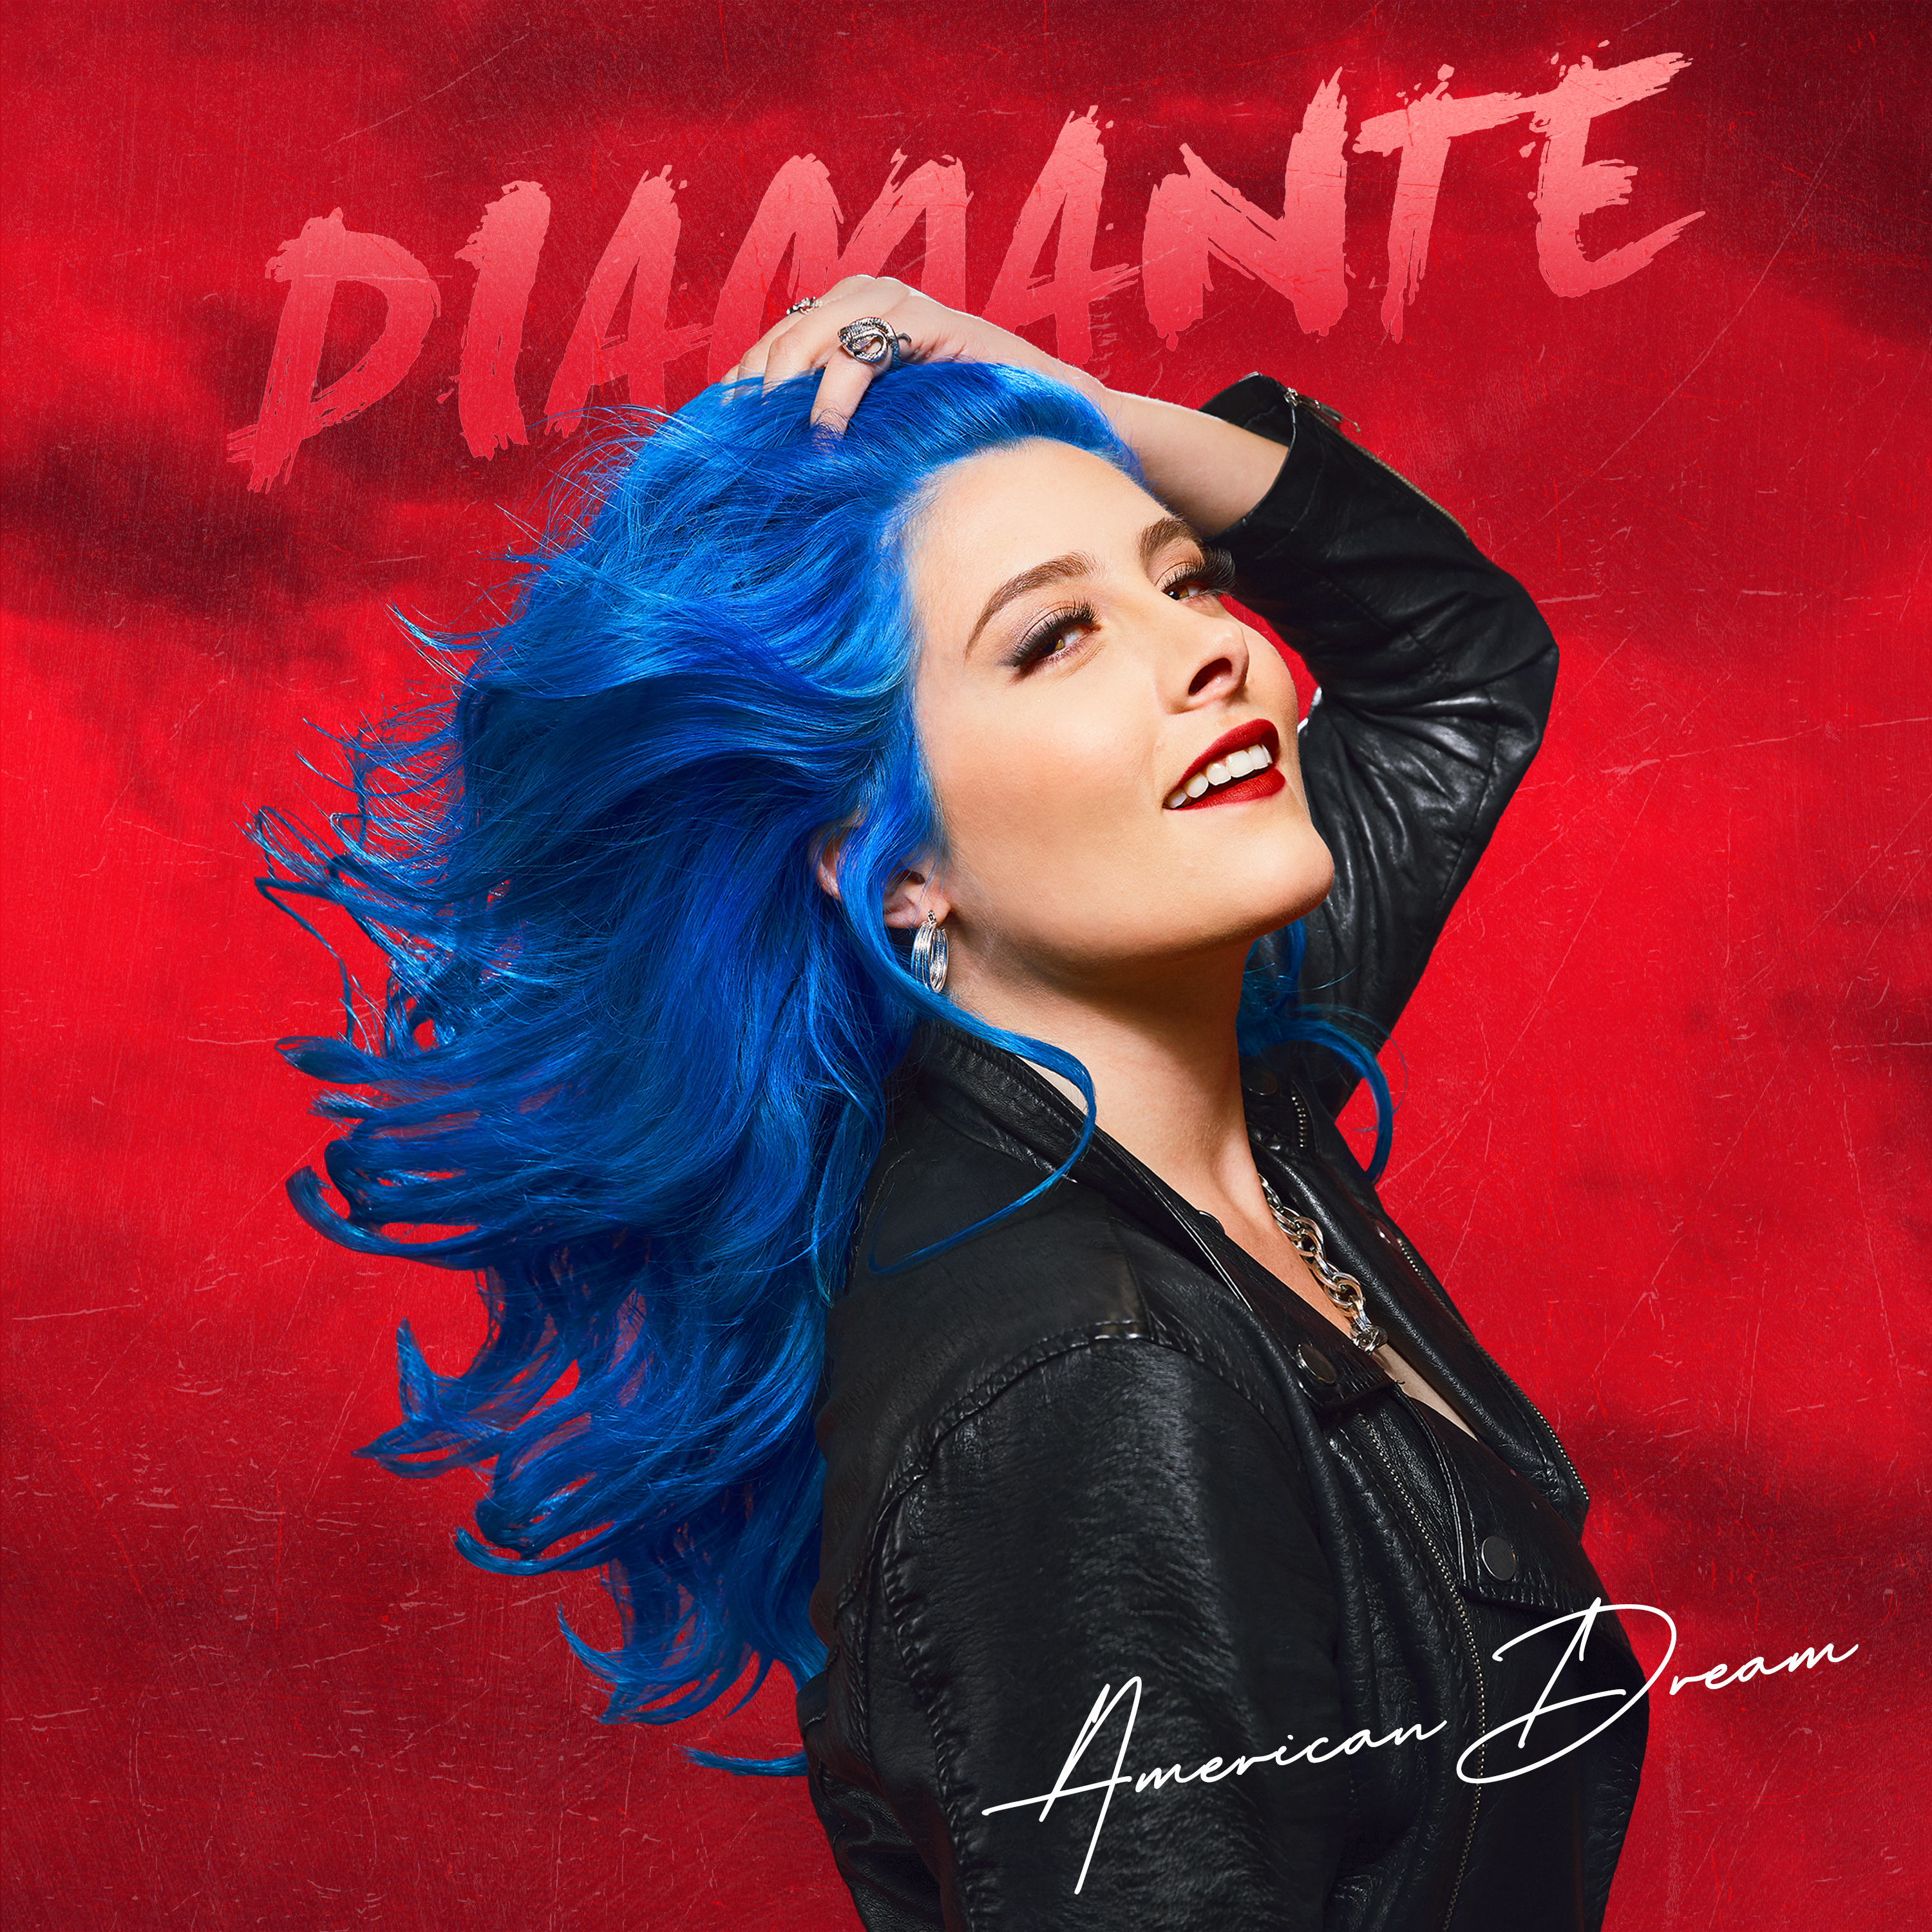 Diamante Shares "American Dream" Video At American Songwriter